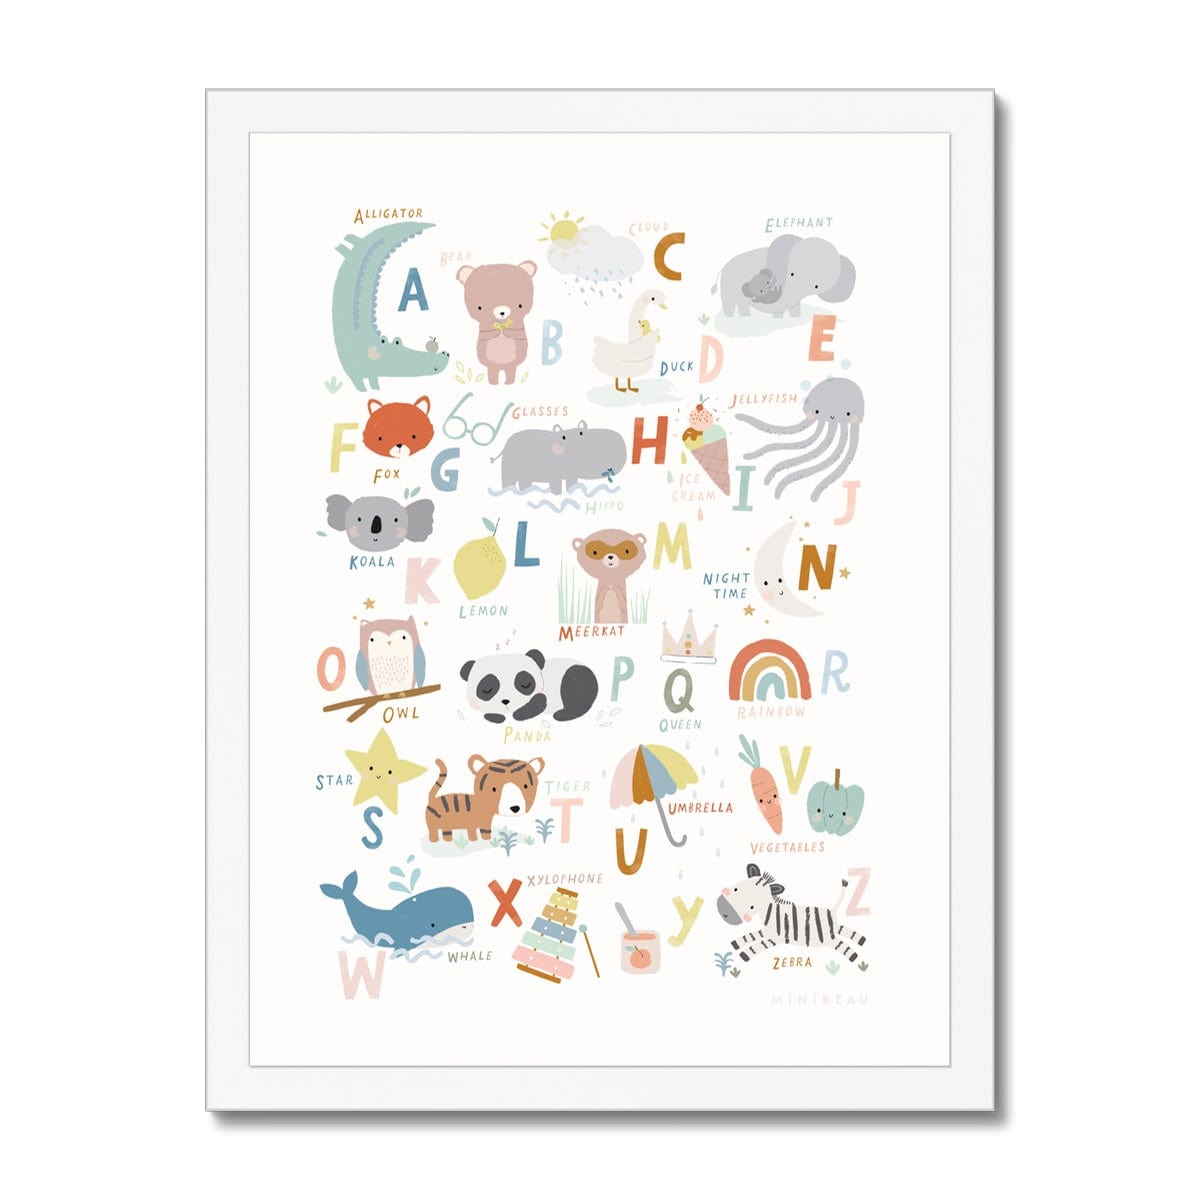 Art print in white frame. Our Cute animals Alphabet Art print features a variety cute animals and everyday items in soft tones, representing every letter of the alphabet. The print includes everything from a rainbow and elephant to a star and panda, all set against a clean white background.